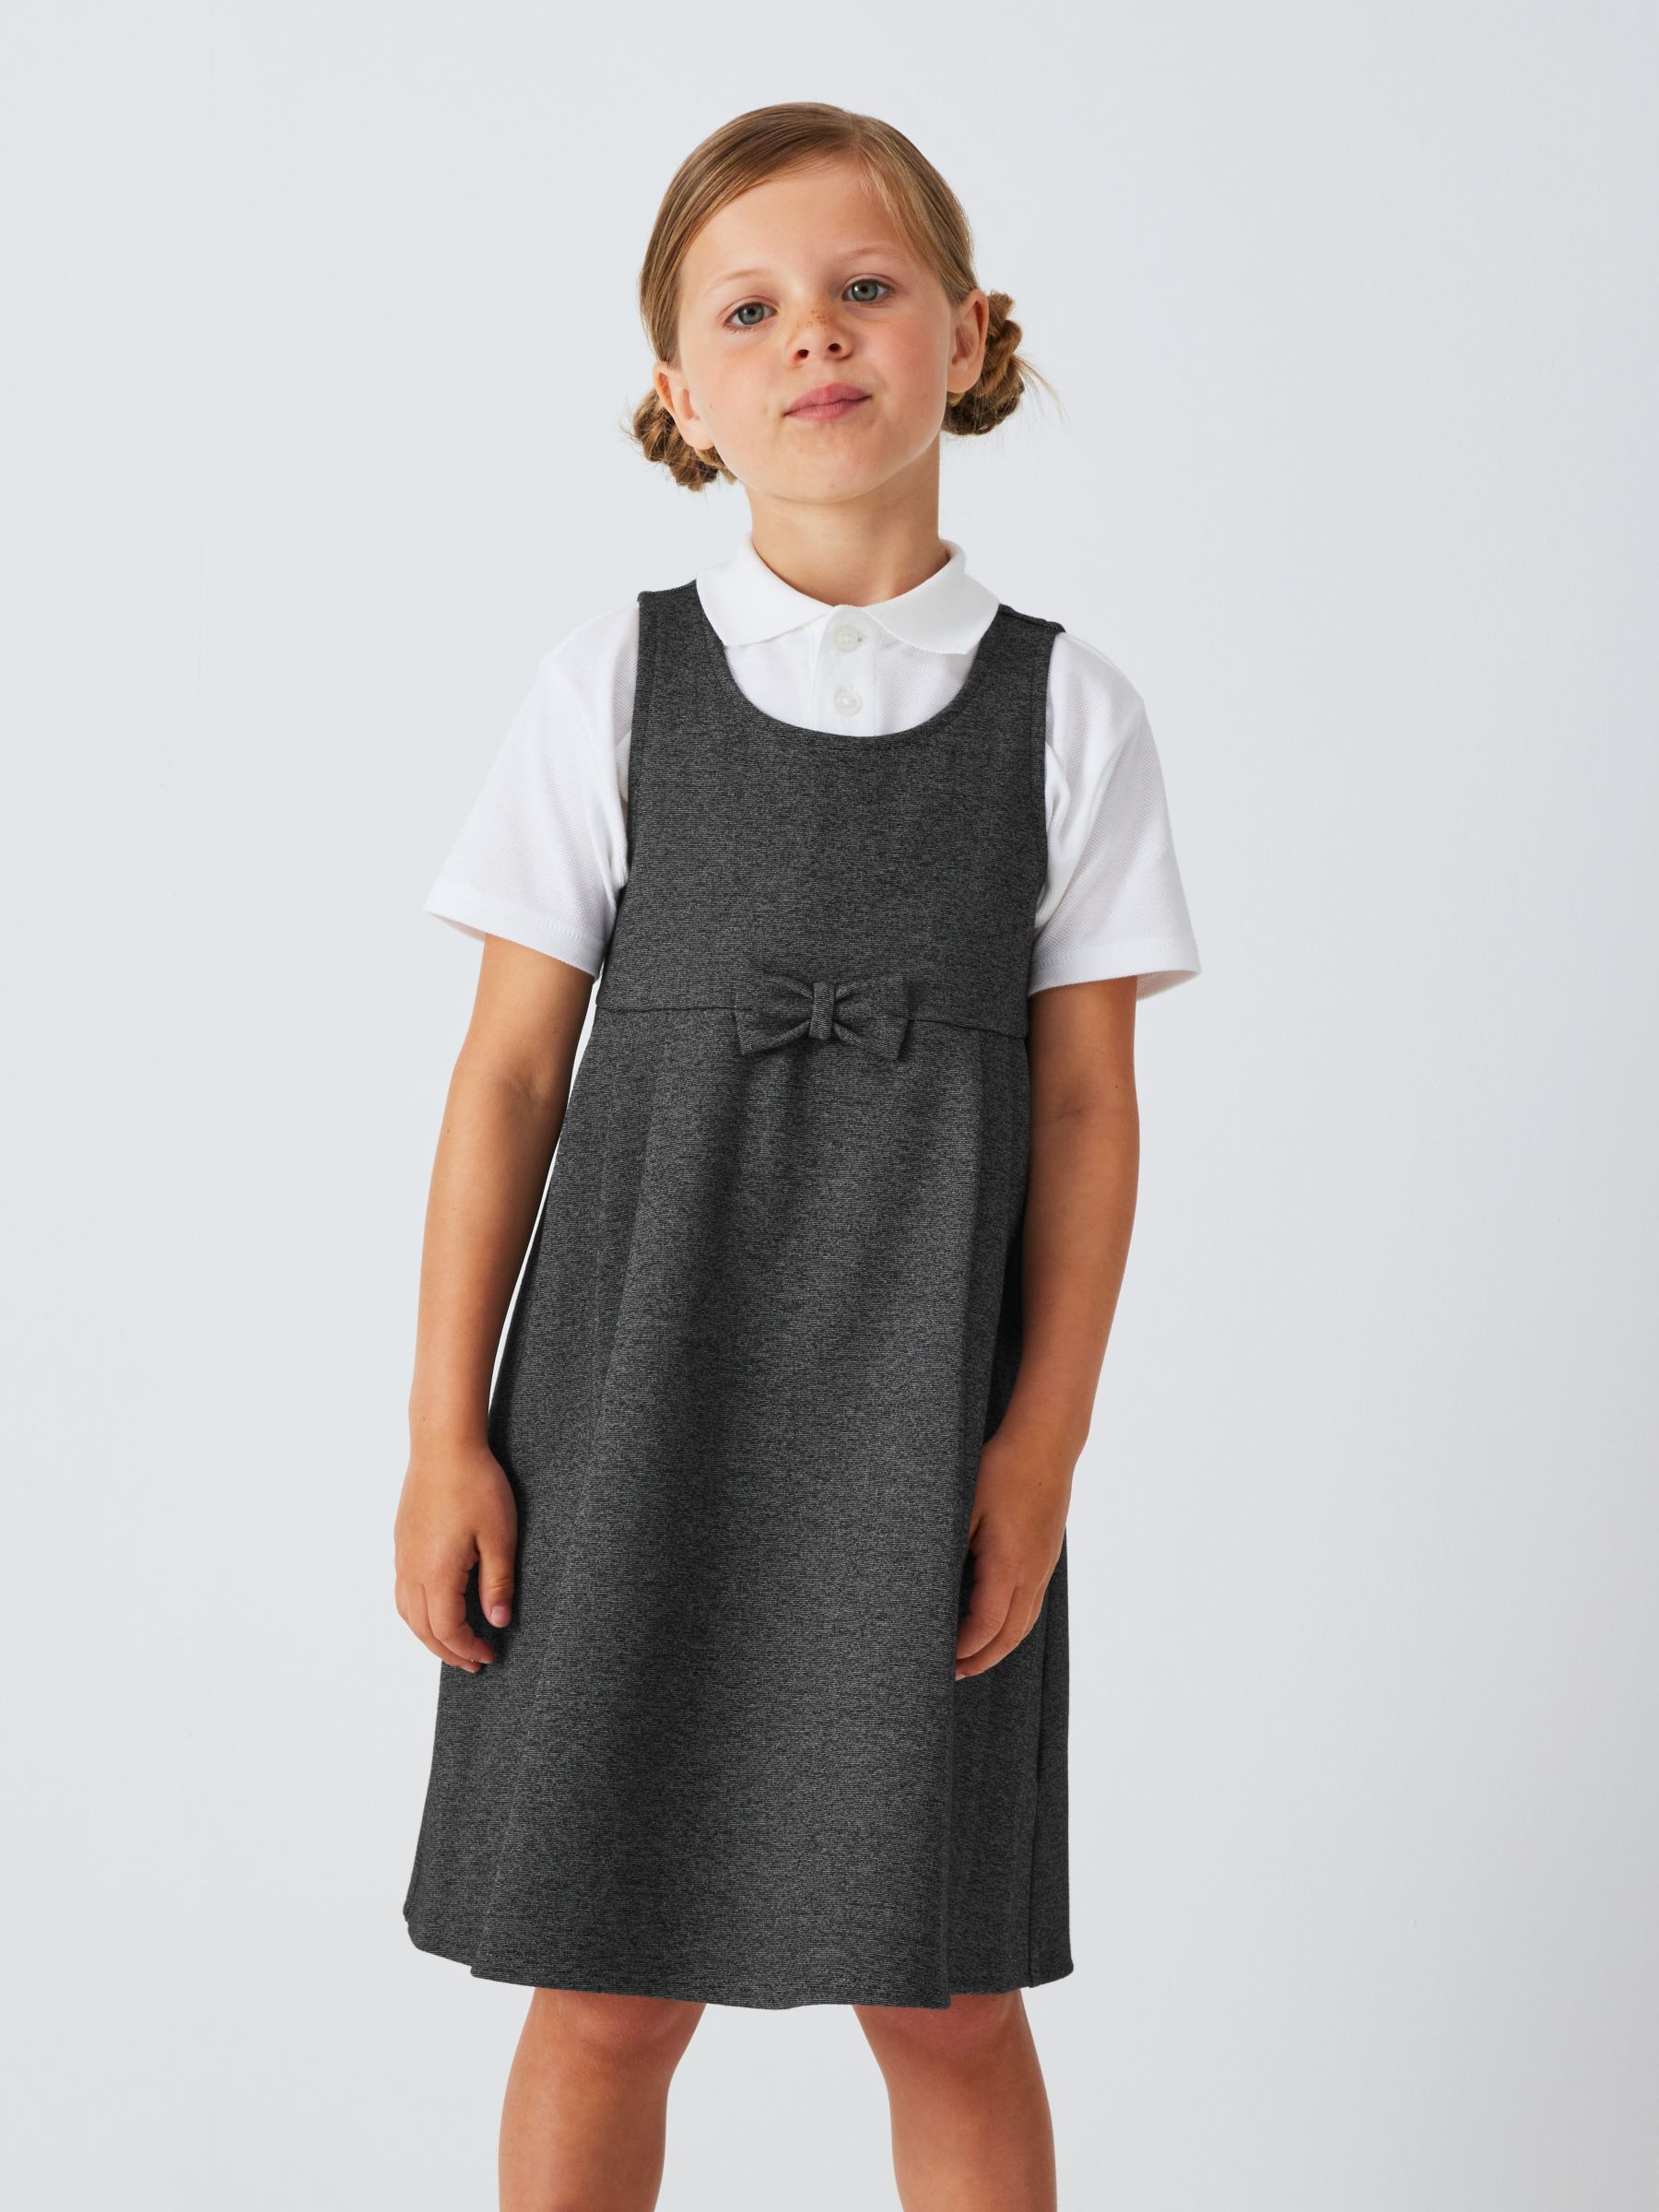 John Lewis Girls' Pleated School Tunic With Bow, Grey, 12 years